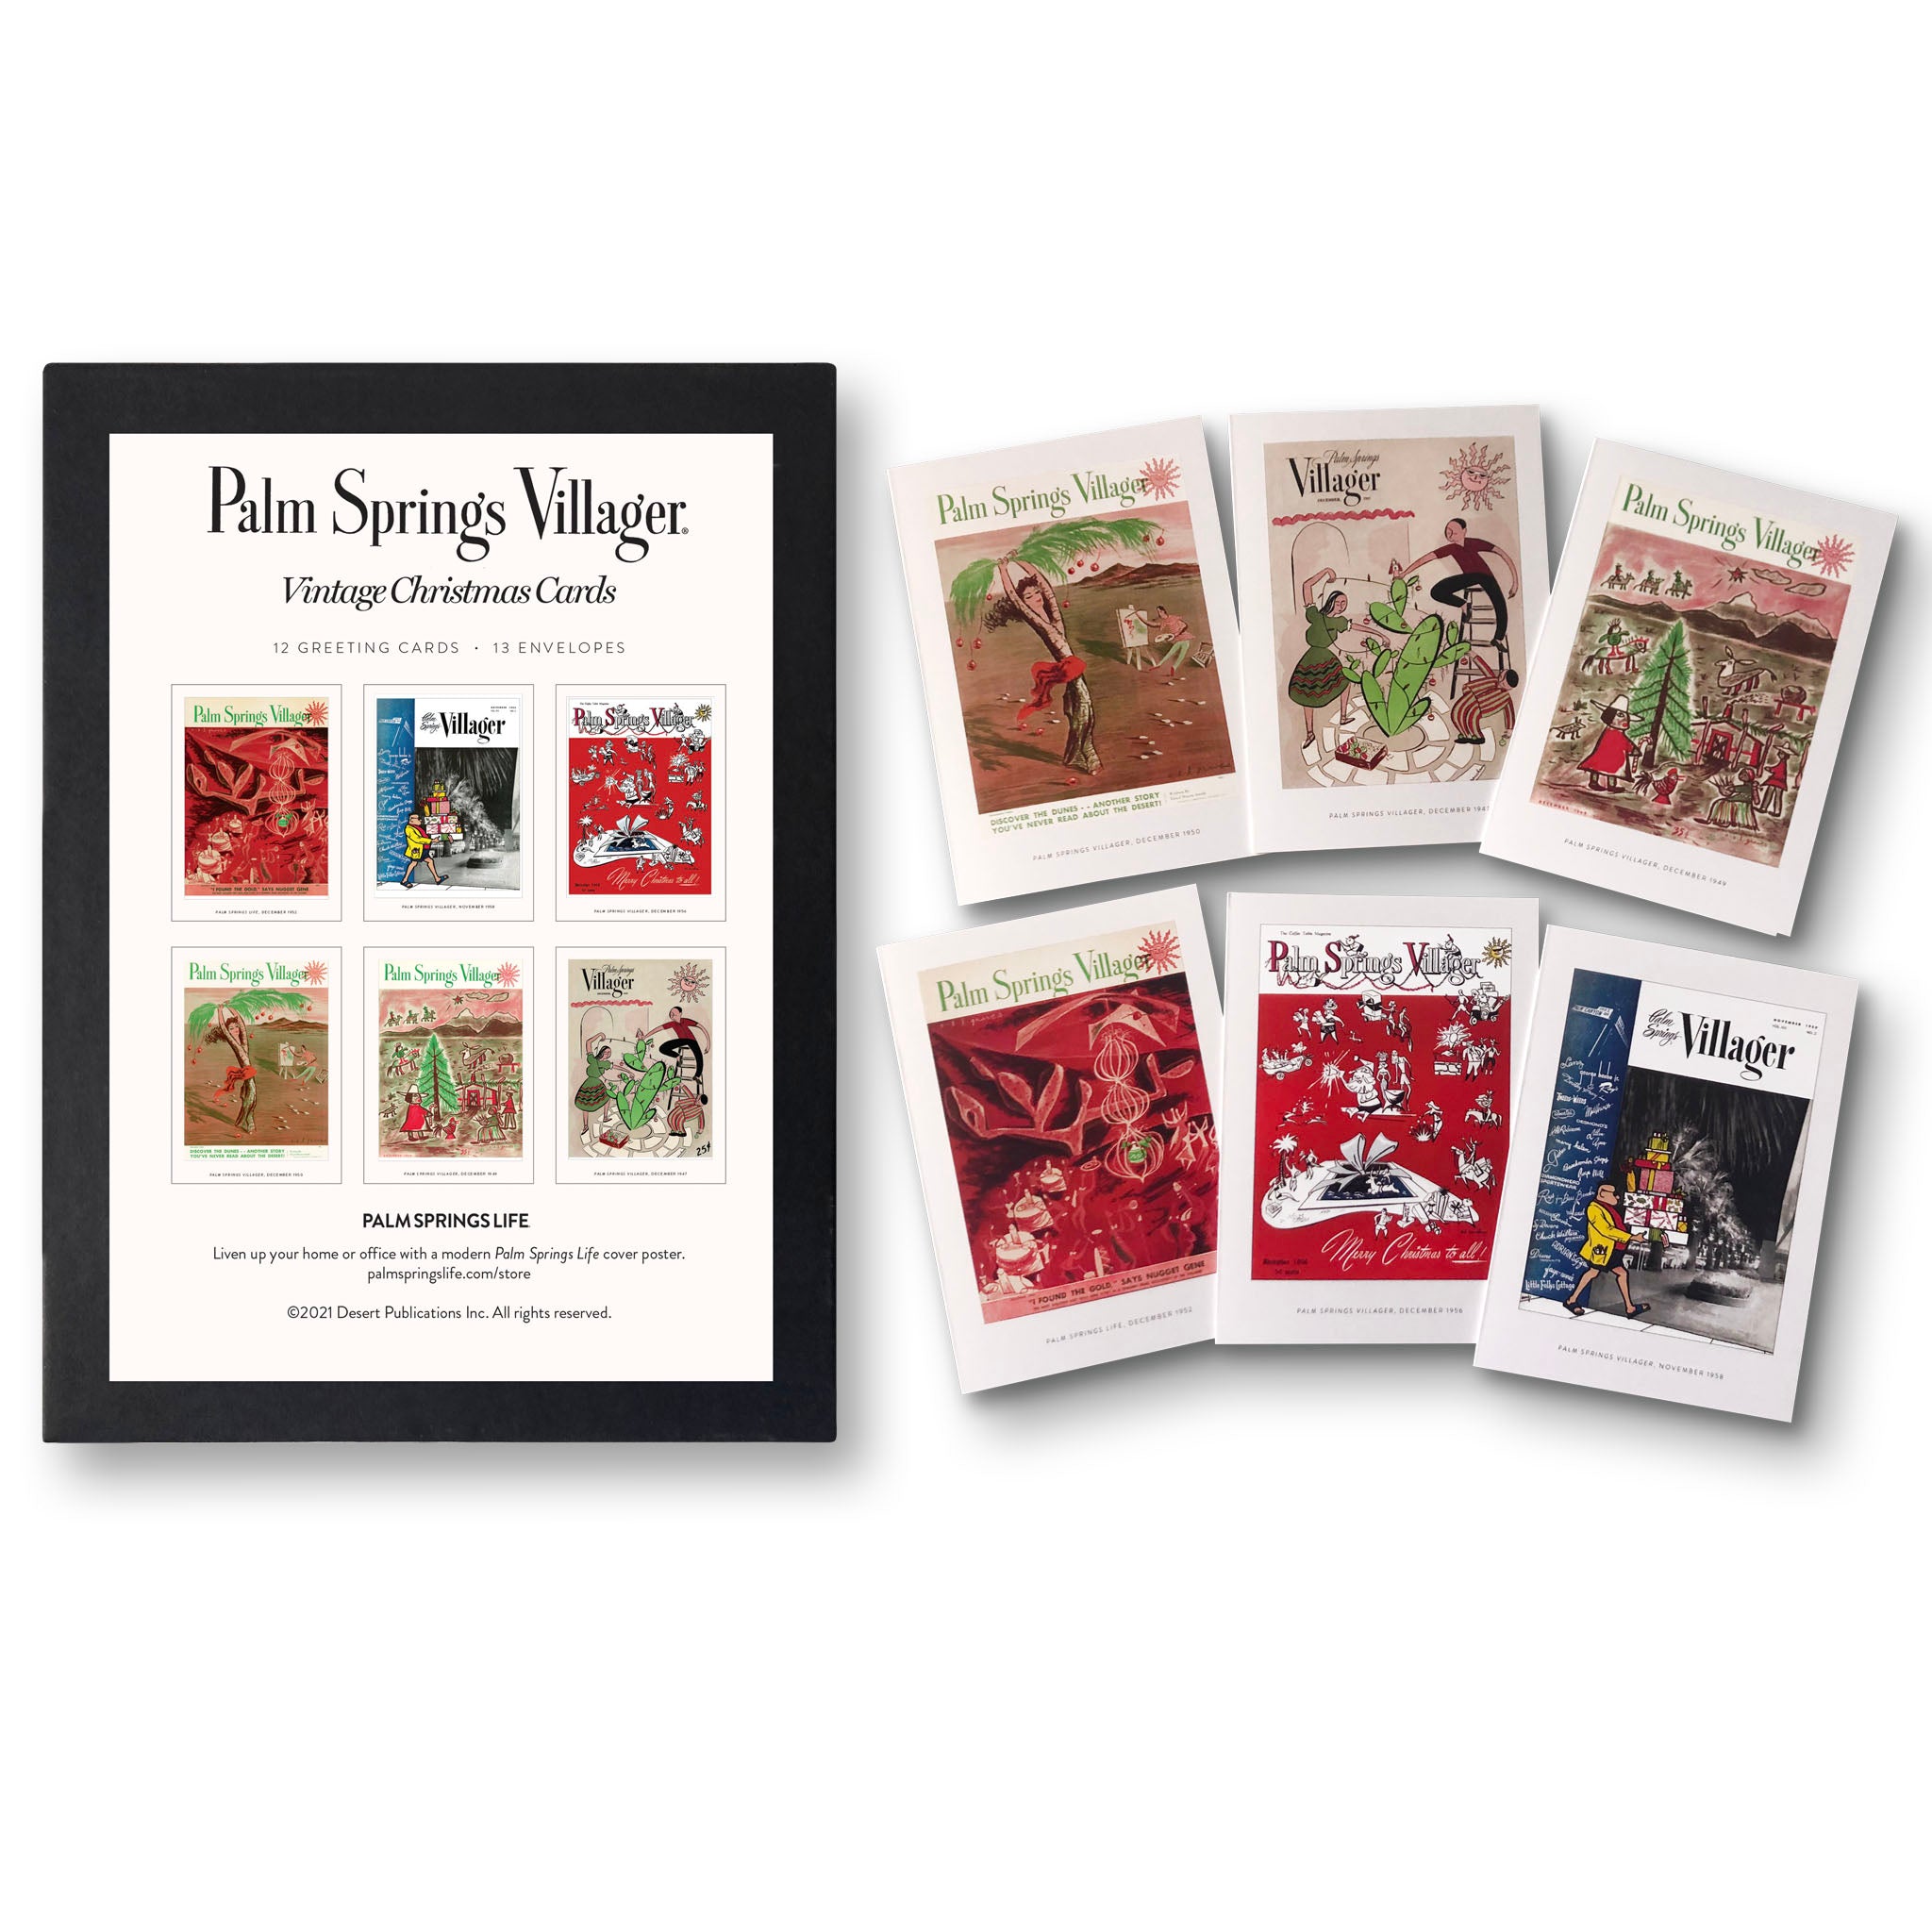 Palm Springs Villager Holiday Covers Notecard Set